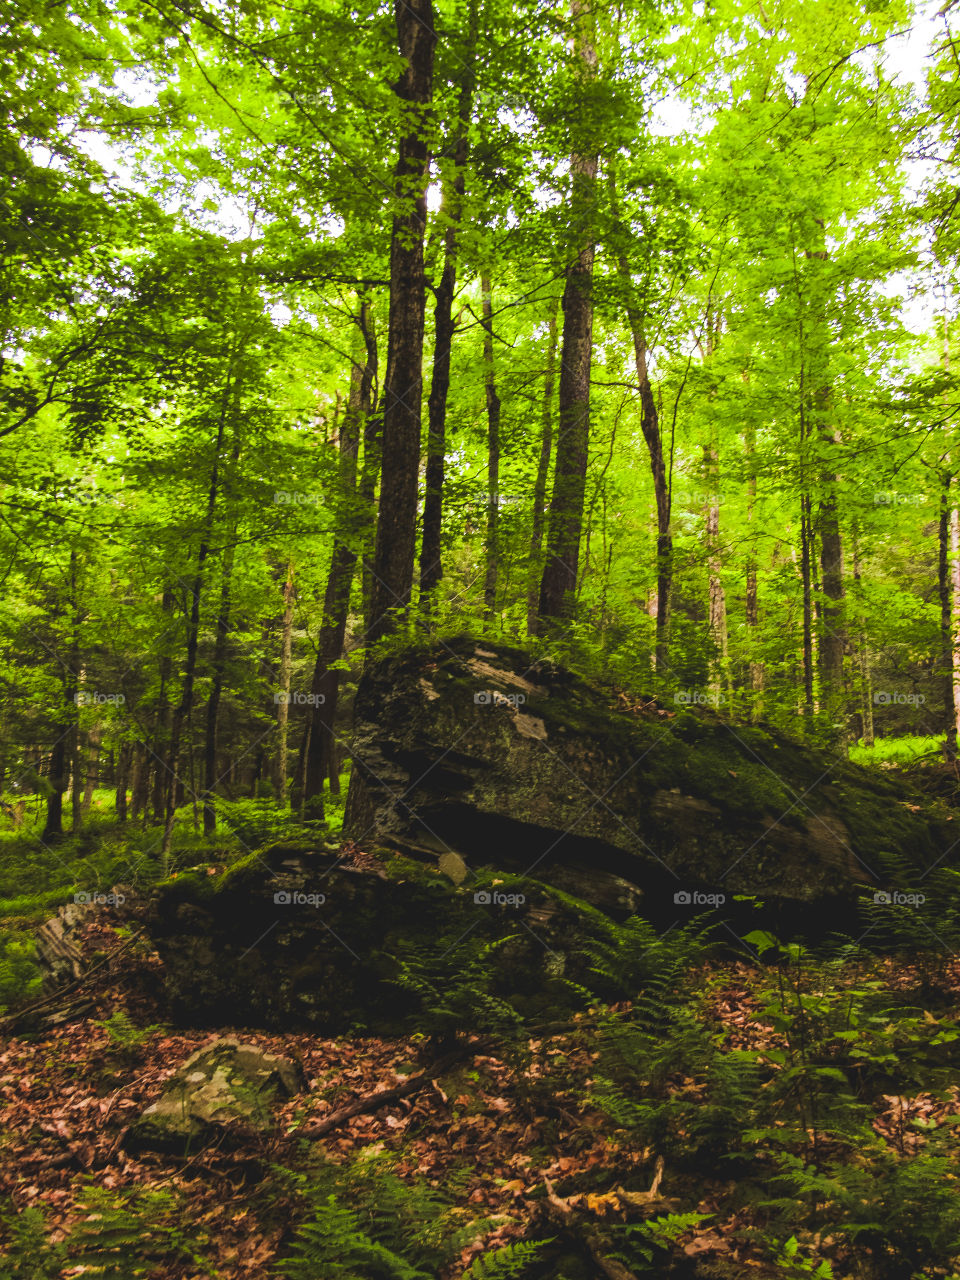 New York, Arksville, Mountain, Mountains, trees, nature, wildlife, panoramic view, summer, Landscape, Leaf, woods, 